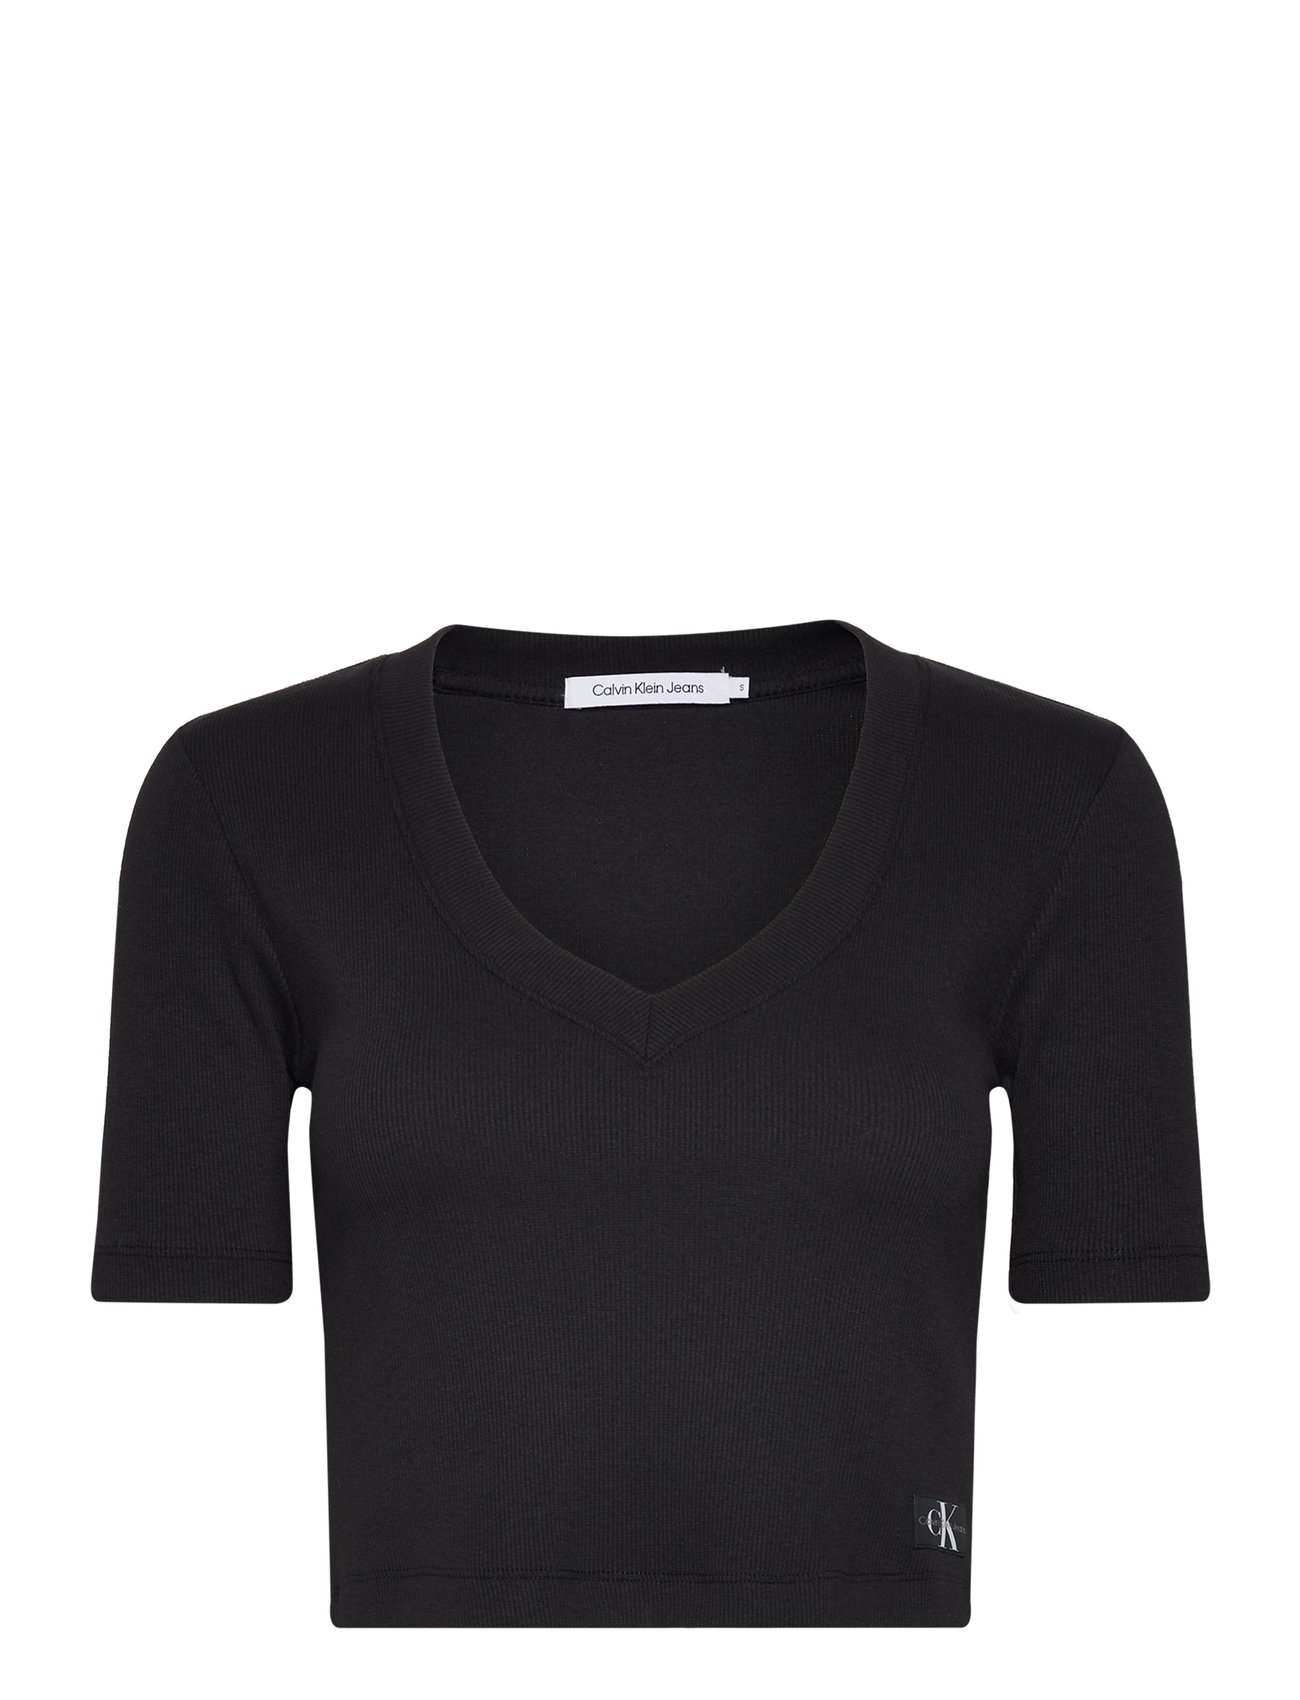 Calvin Klein Jeans Woven Label Rib V-neck Tee - T-shirts & Tops